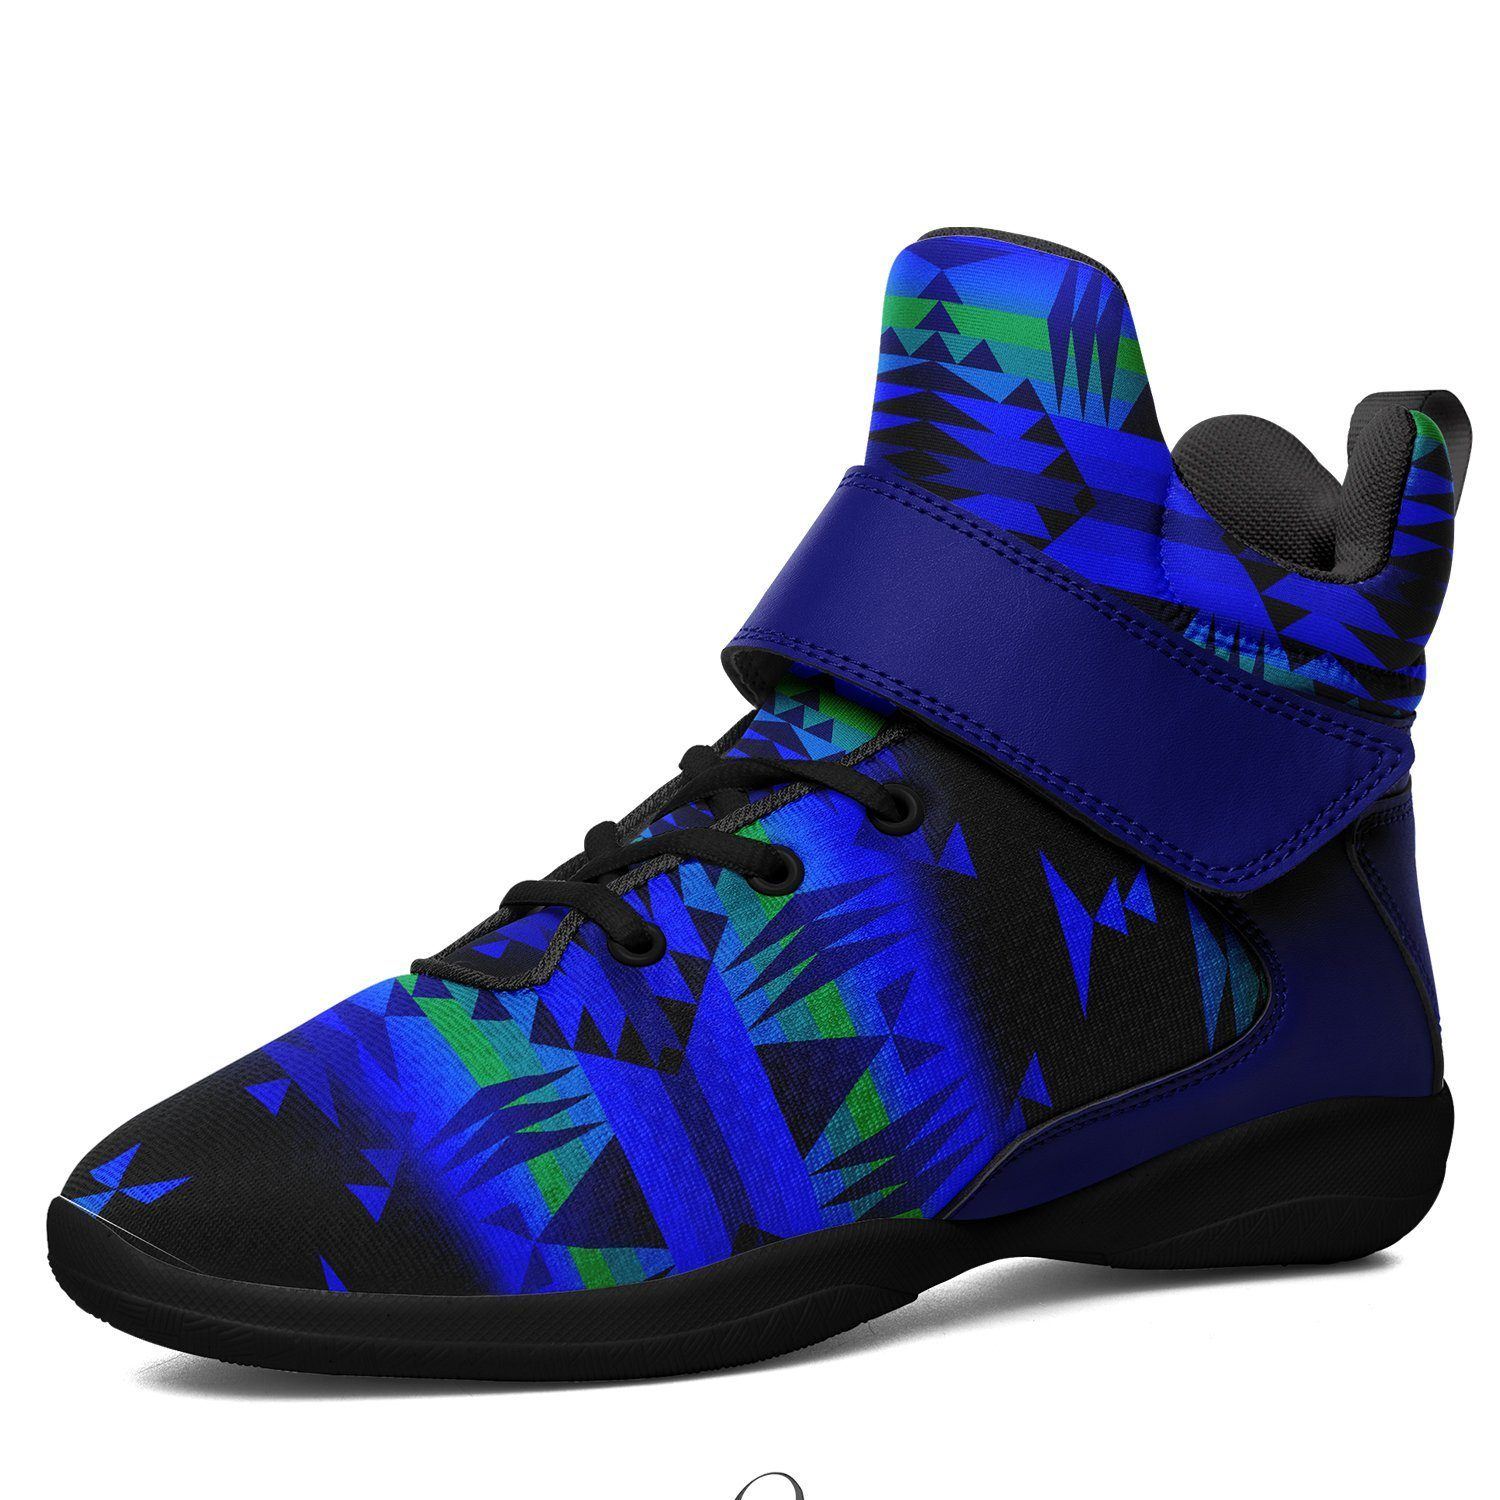 Between the Blue Ridge Mountains Kid's Ipottaa Basketball / Sport High Top Shoes 49 Dzine US Child 12.5 / EUR 30 Black Sole with Blue Strap 